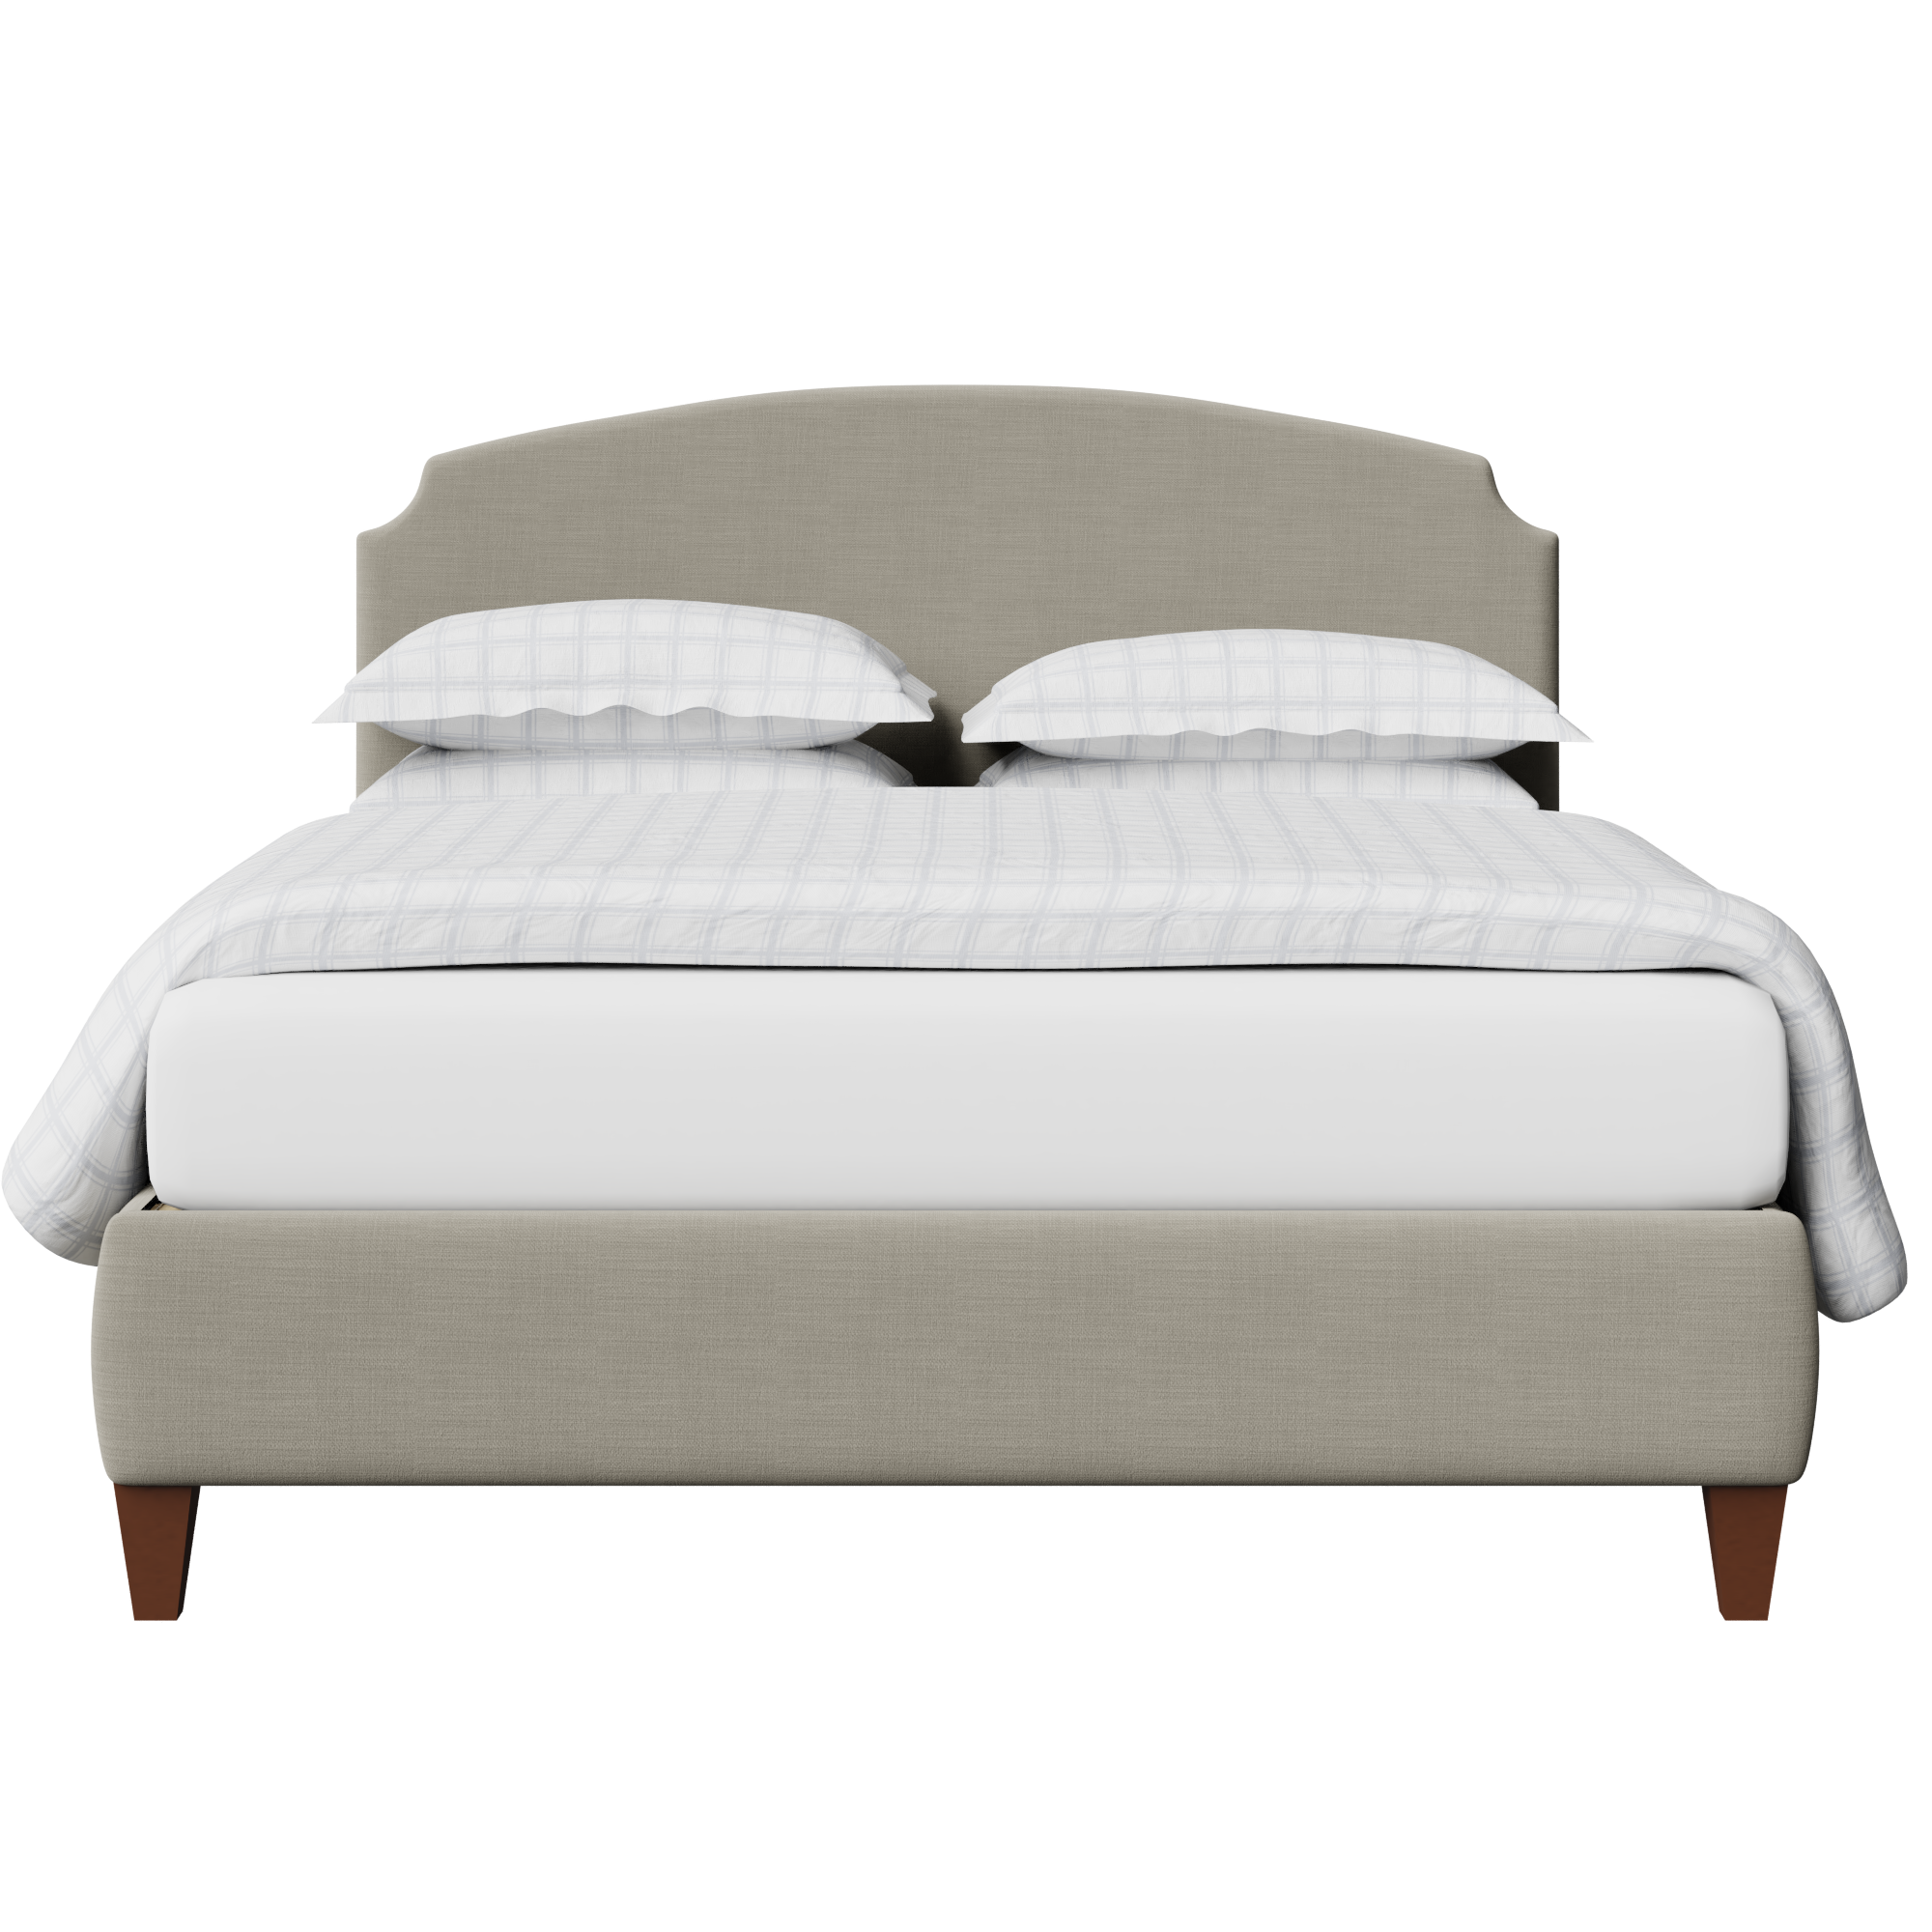 Lide upholstered bed in grey fabric